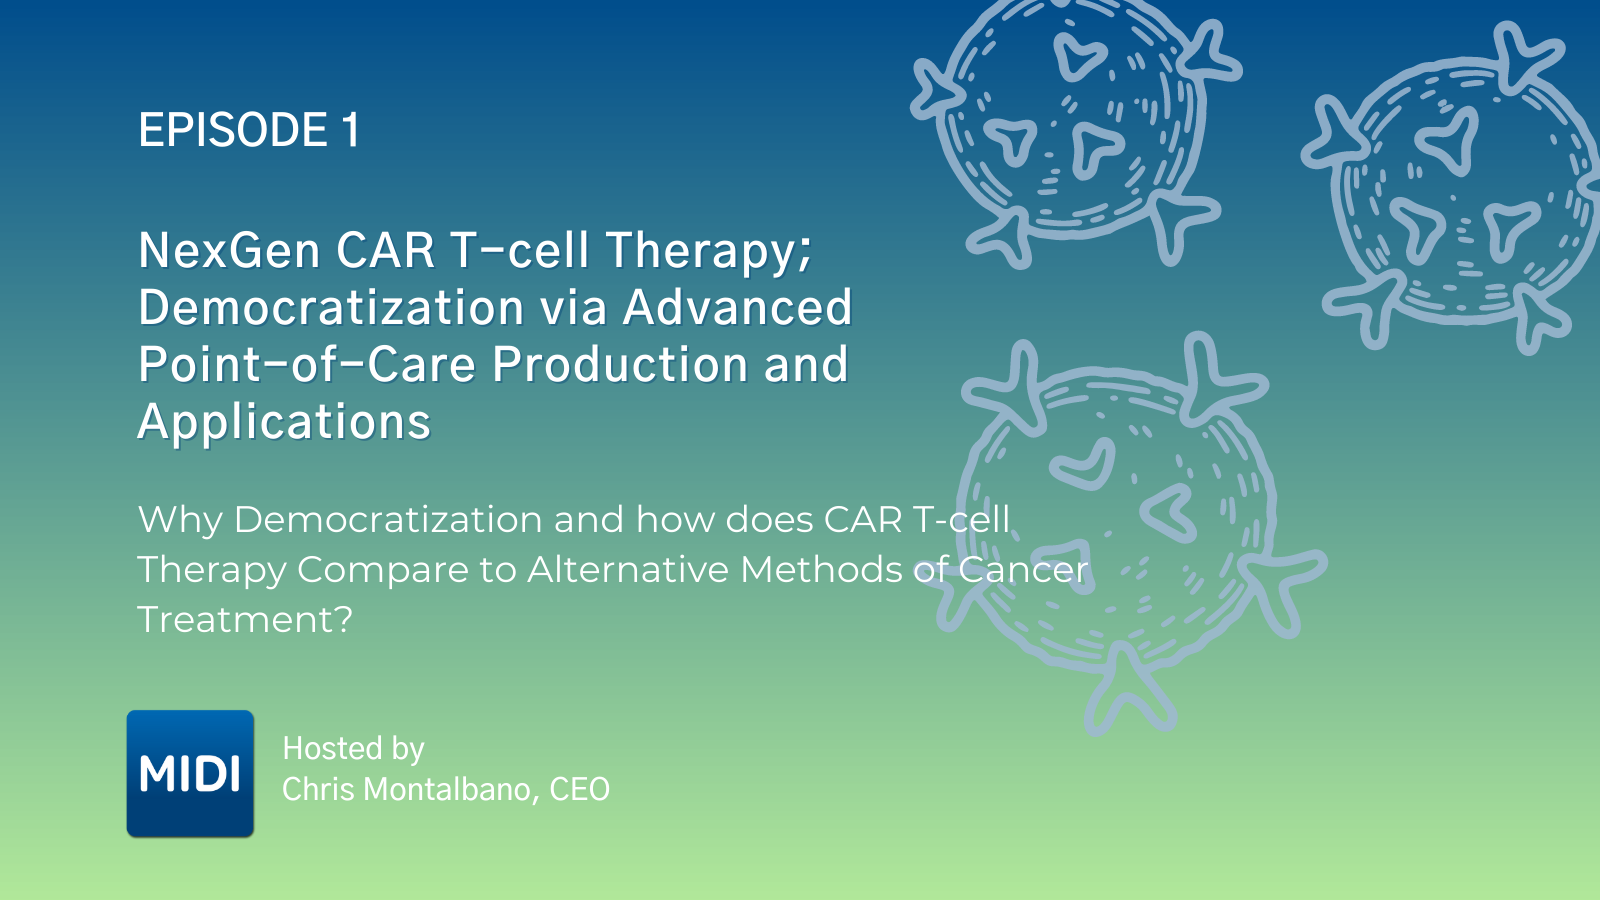 Ushering a New Era of Cancer Treatment with Democratization of CAR T-cell Therapy}